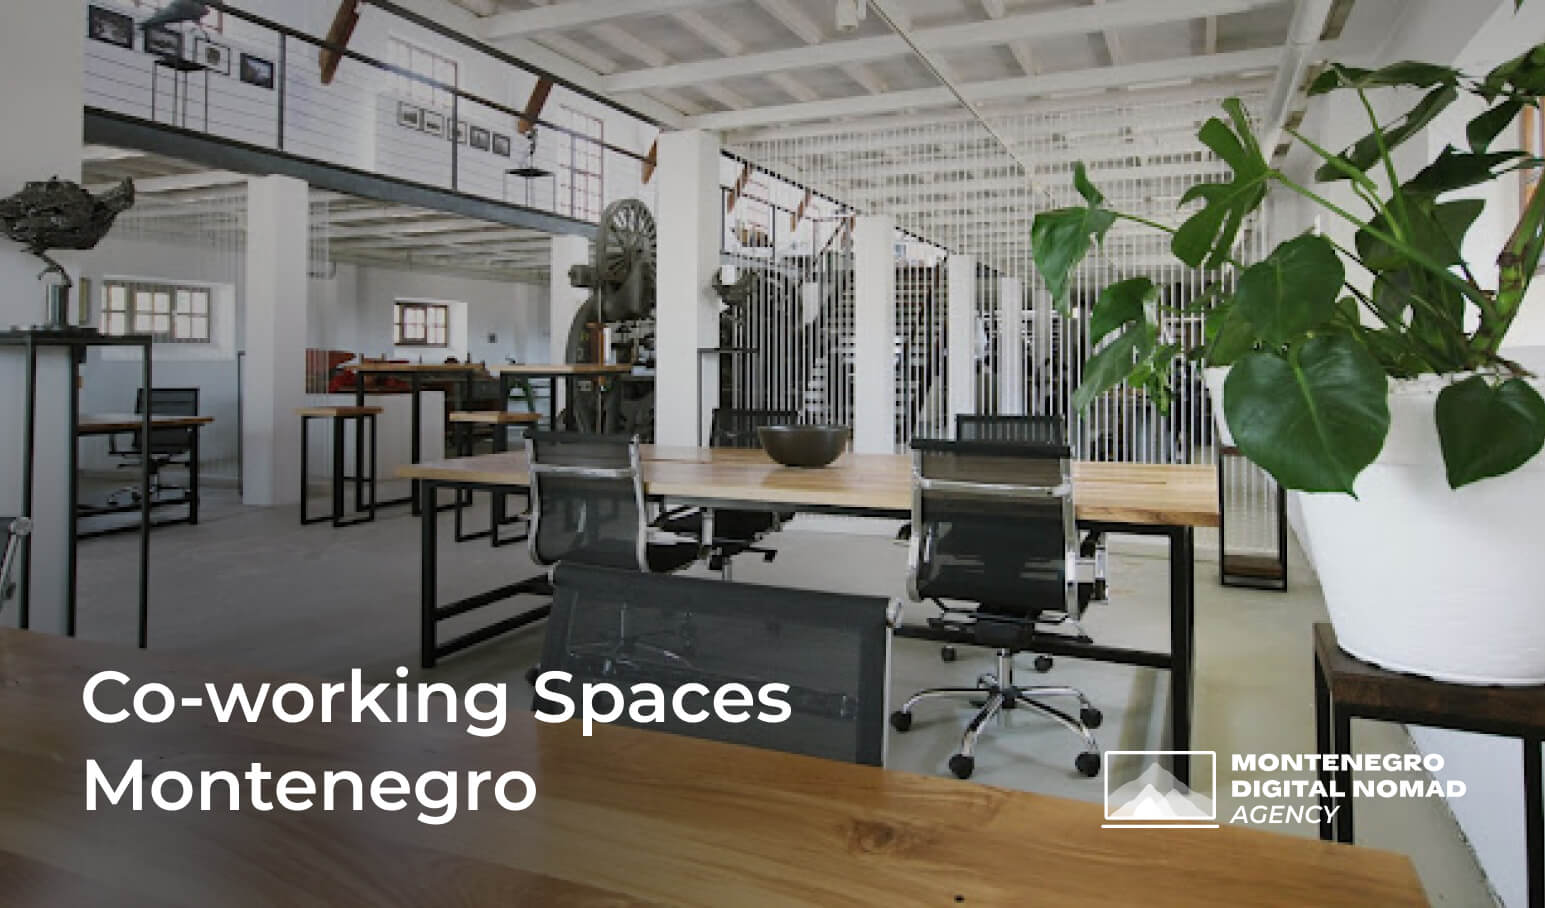 Image of a co-working space in Montenegro - Text overlay reads - Co-working Spaces Montenegro 